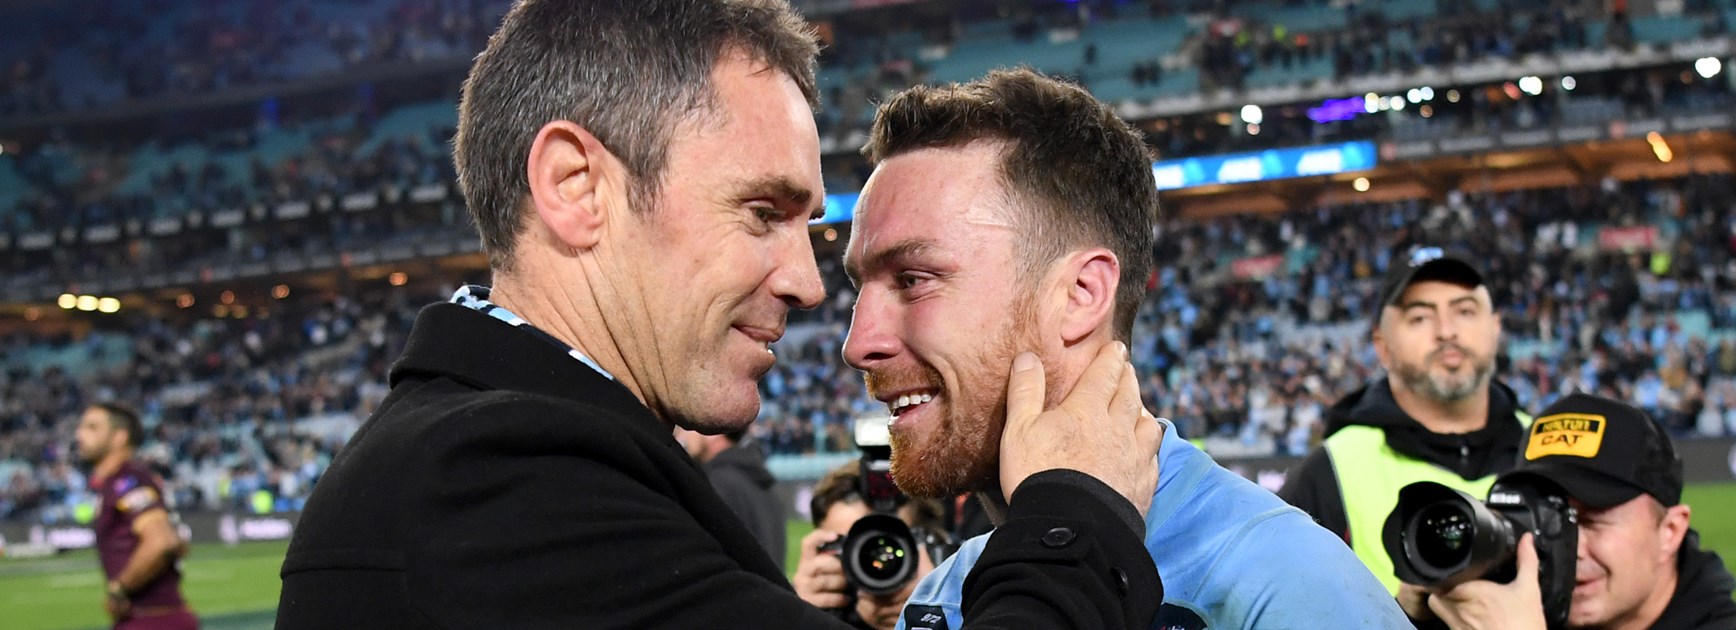 Fittler pays tribute to "crucial" character Maloney